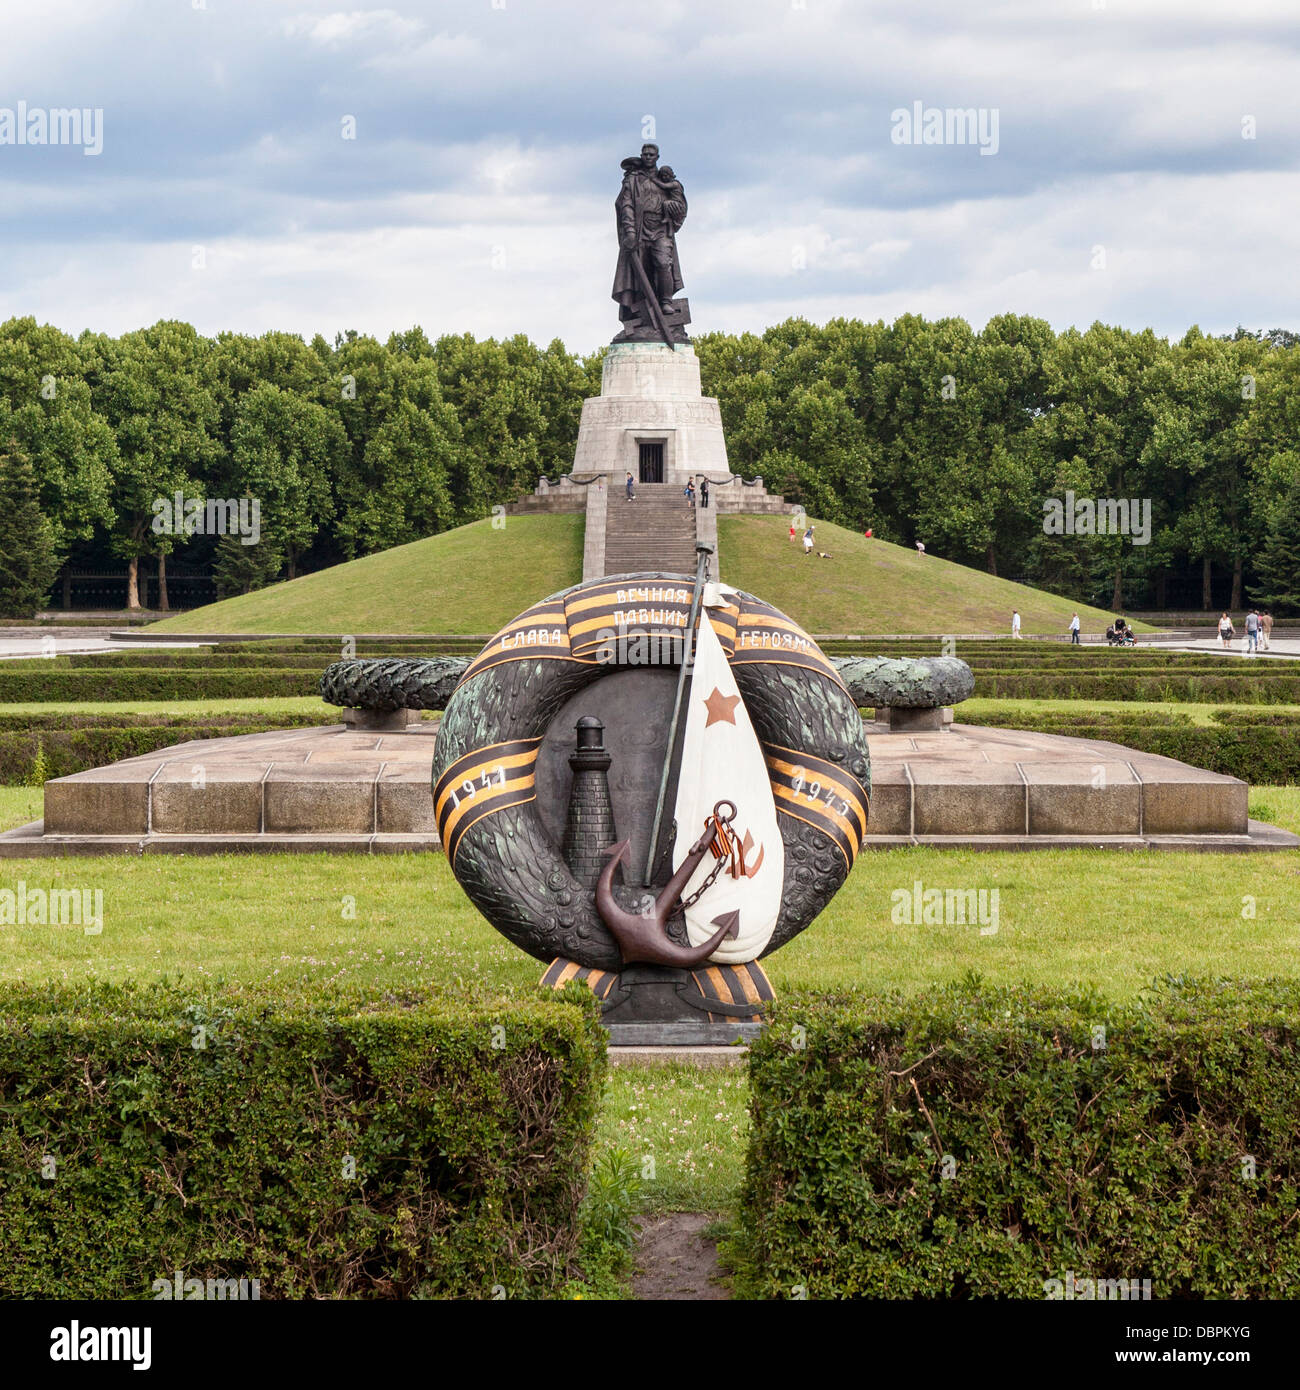 Statue of soldier and decorative wreath at the Soviet War memorial for 7000 soldiers who died in WW2, Treptow, Berlin Stock Photo